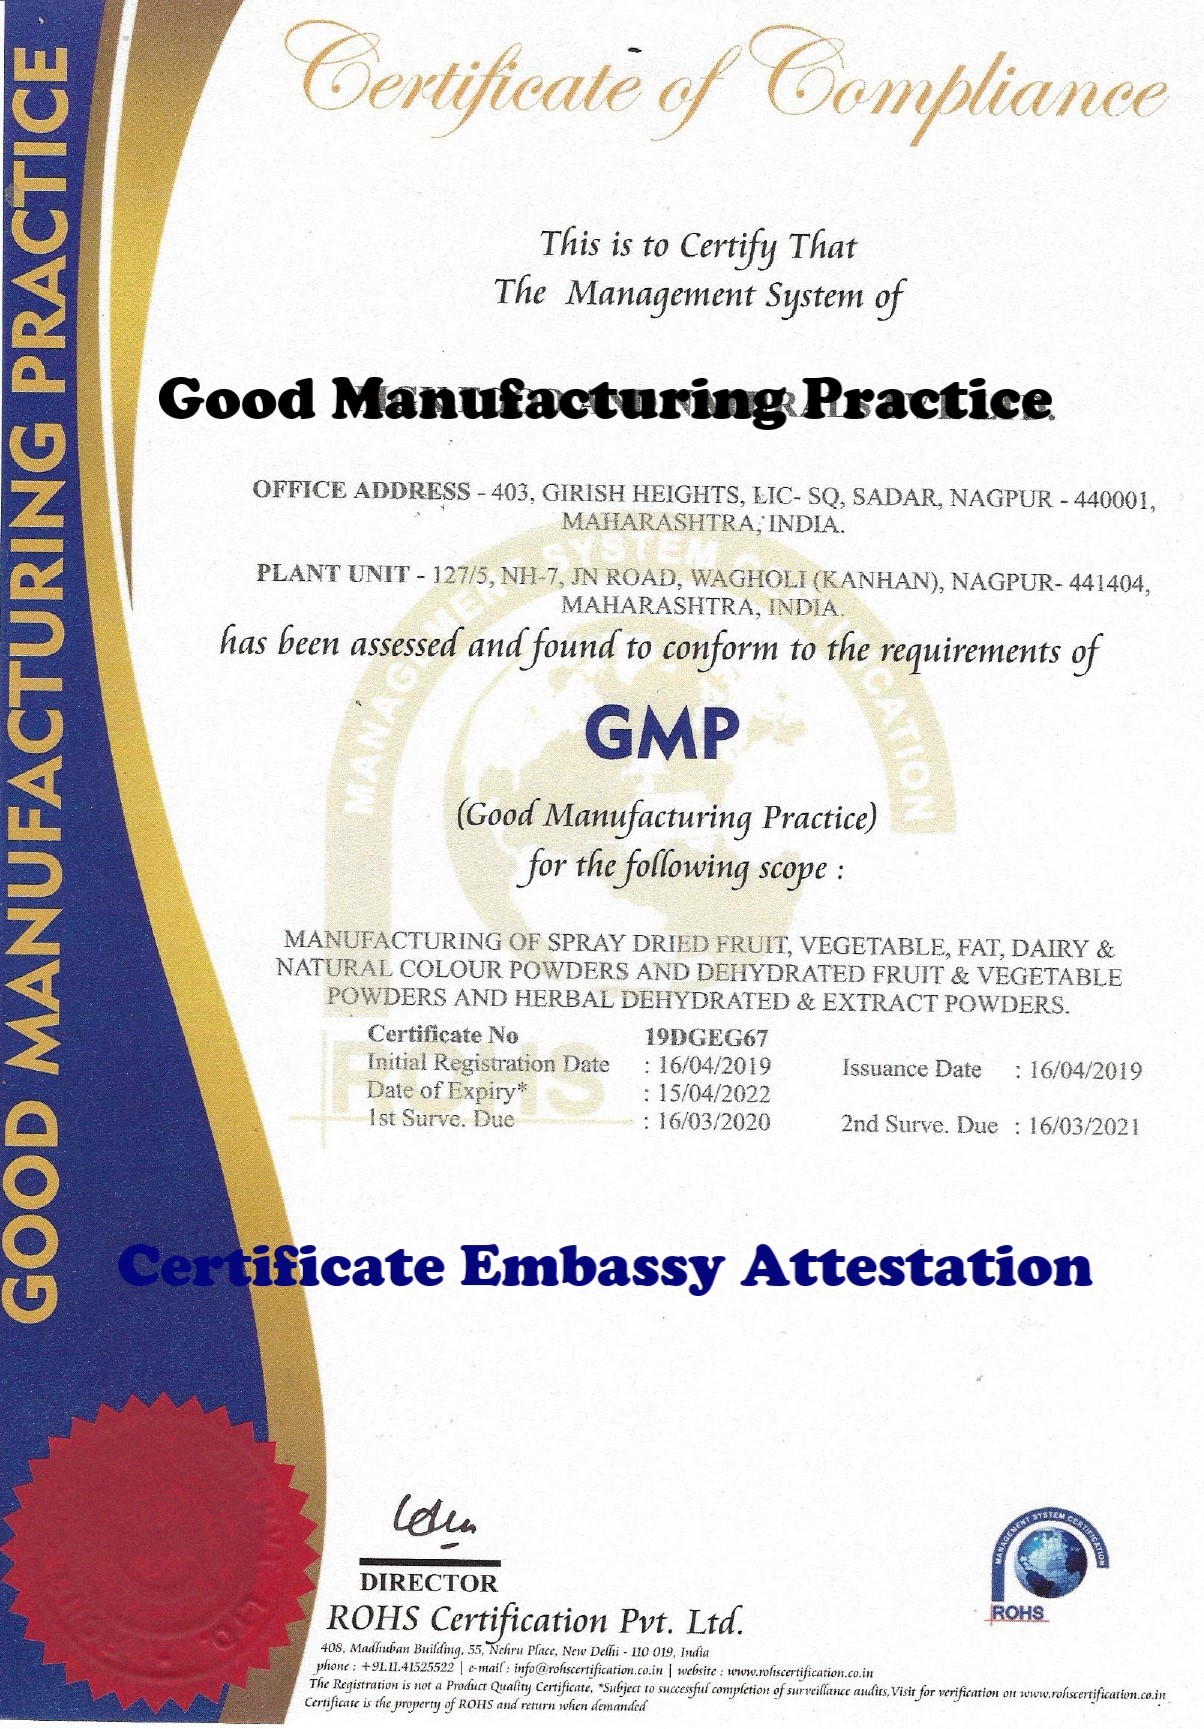 GMP Certificate Attestation from Ghana Embassy